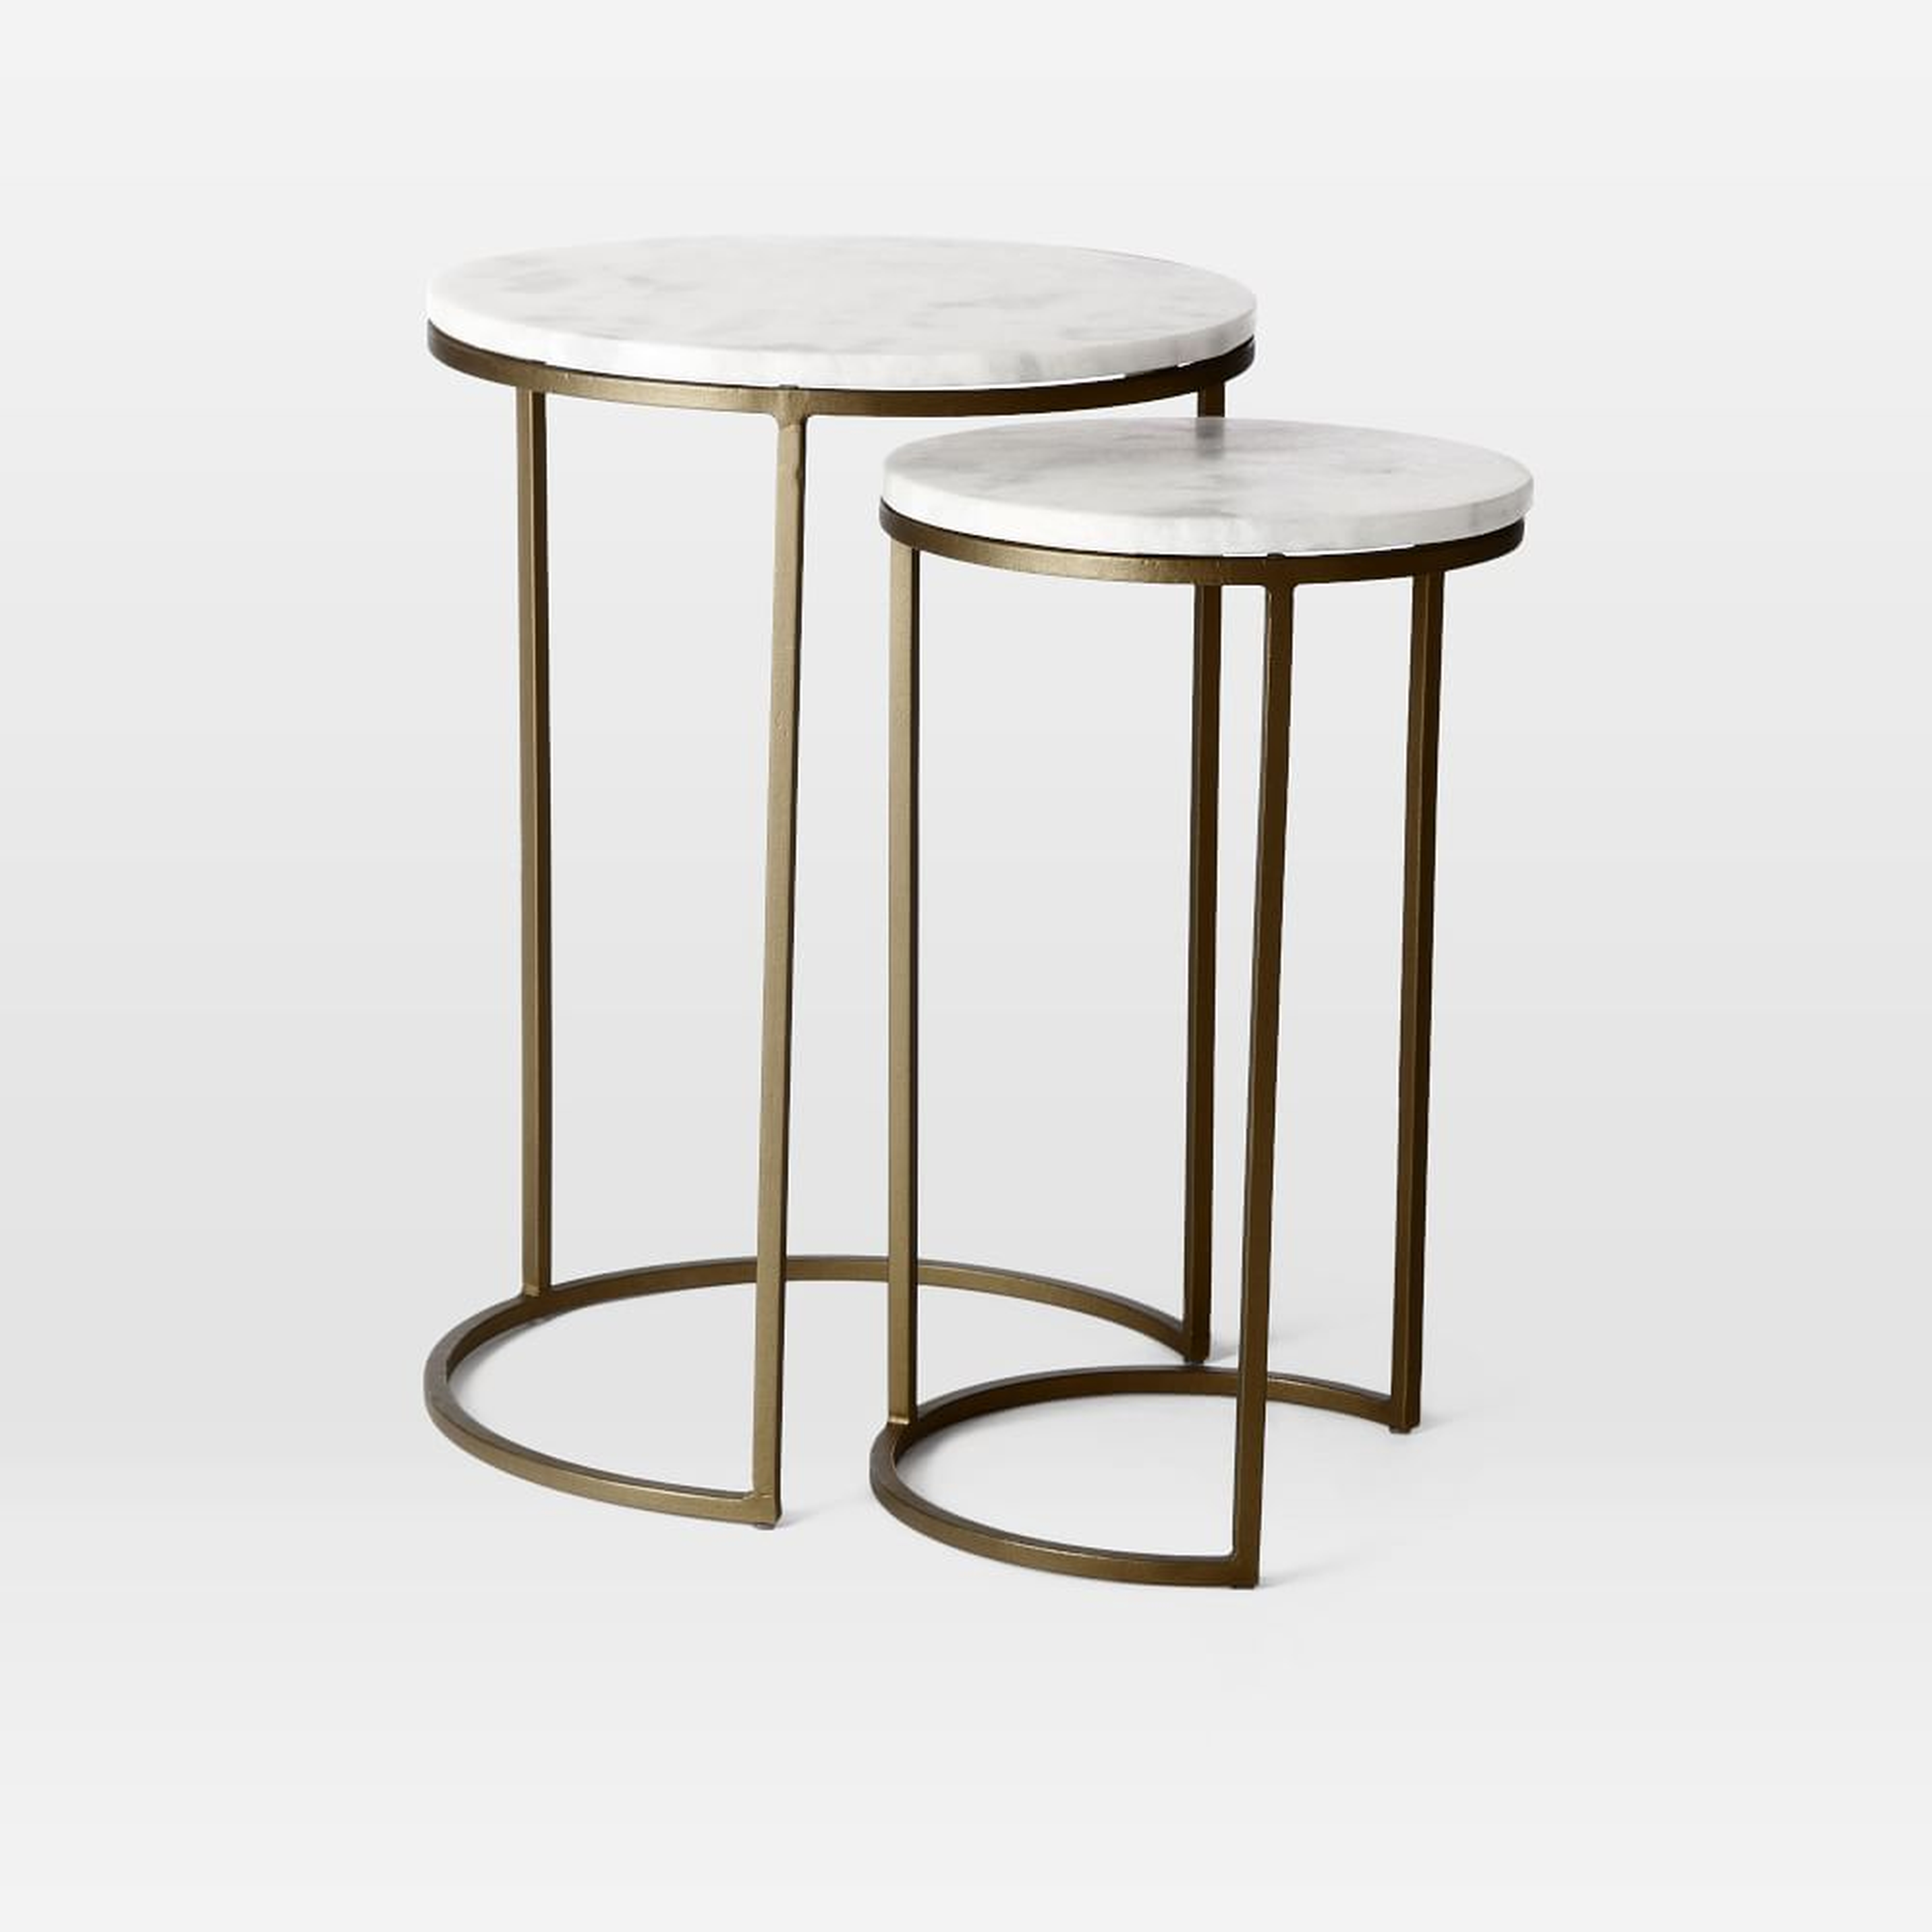 Round 12" Nesting Side Tables, White Marble - West Elm